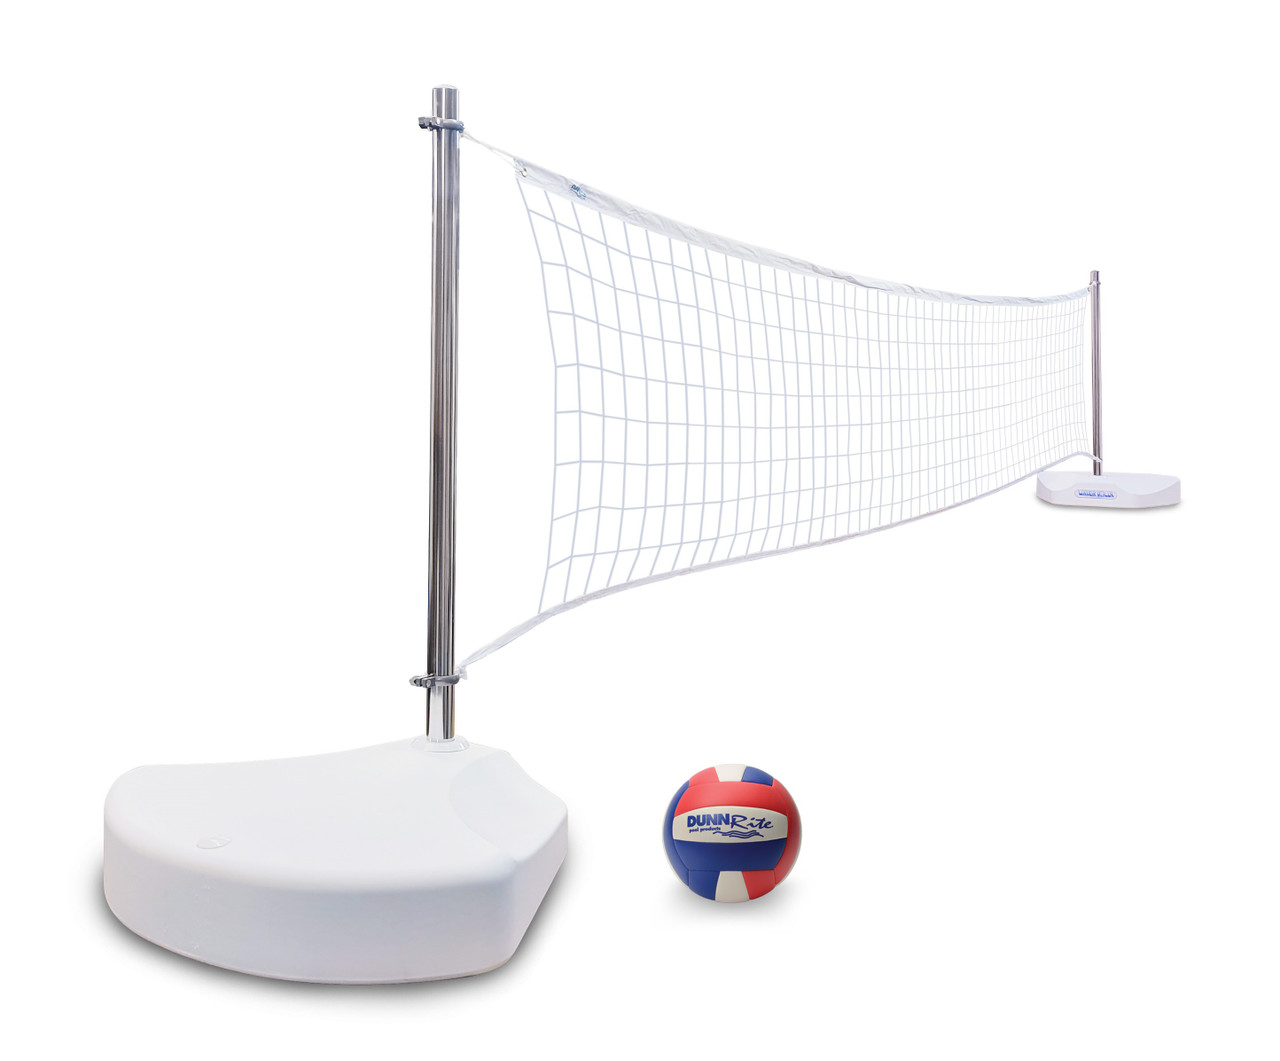 Stainless WaterVolly - Portable Pool Volleyball